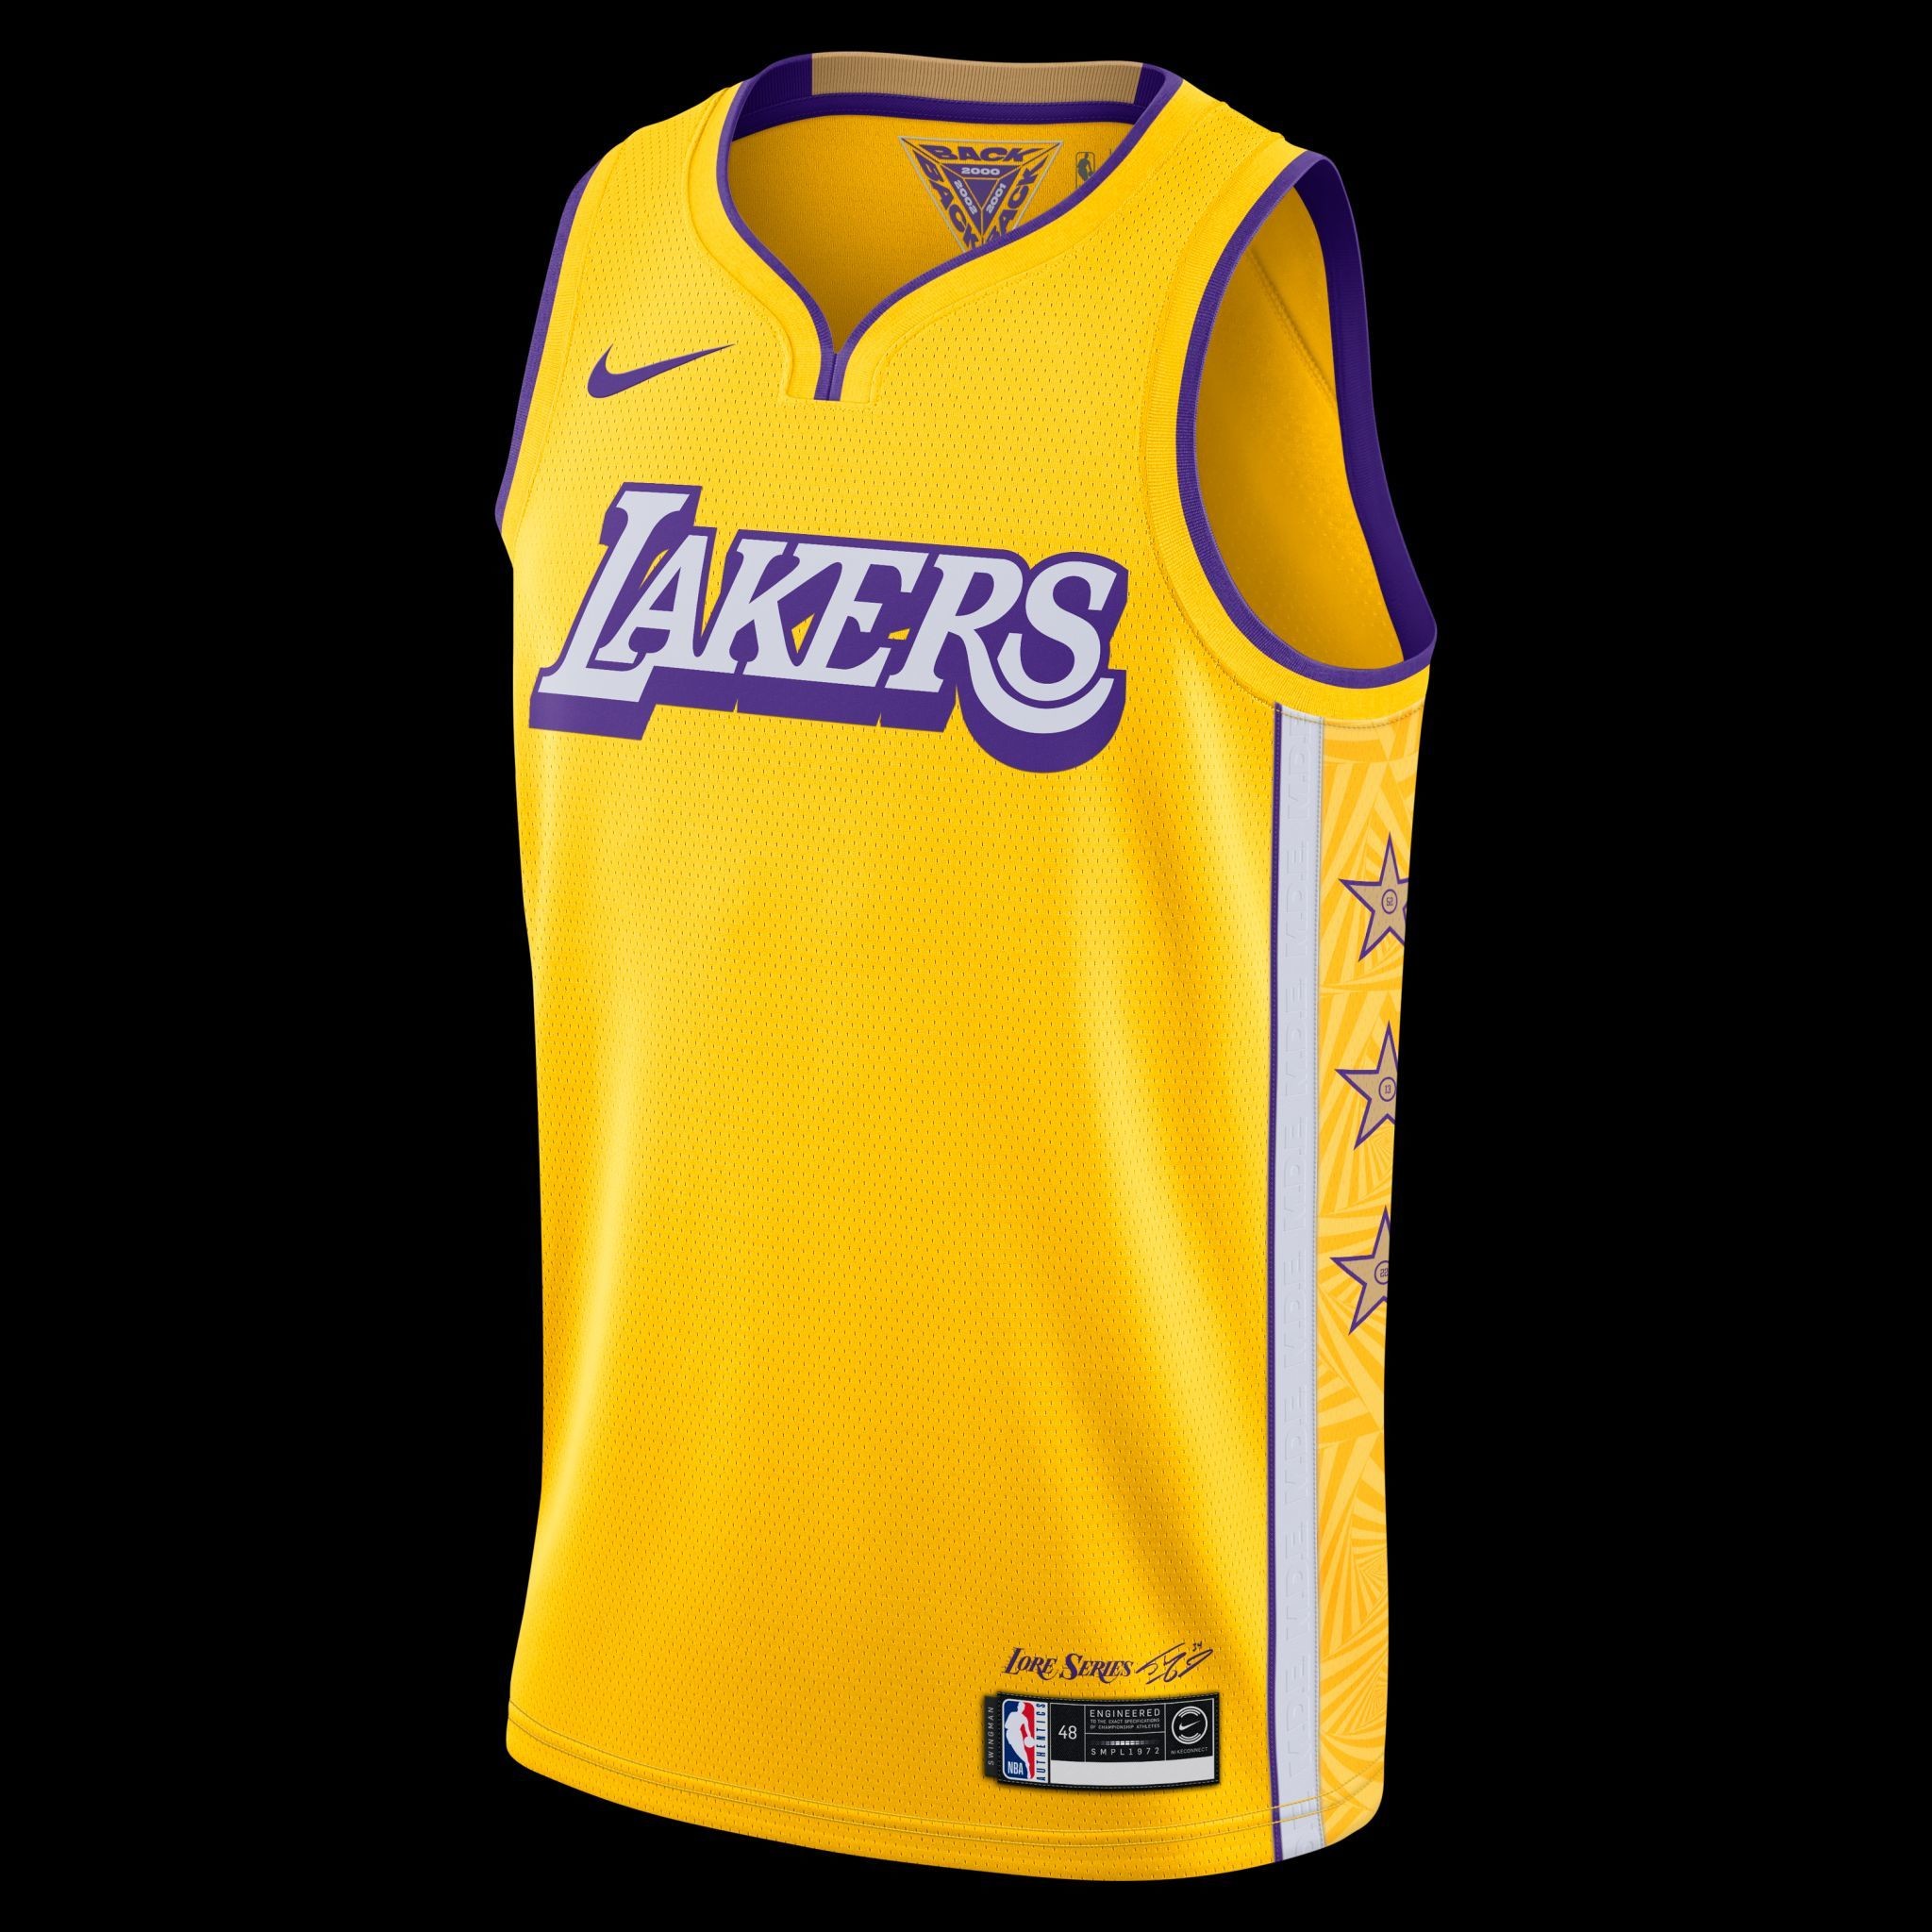 Get your Los Angeles Lakers City Edition jerseys at Fanatics now